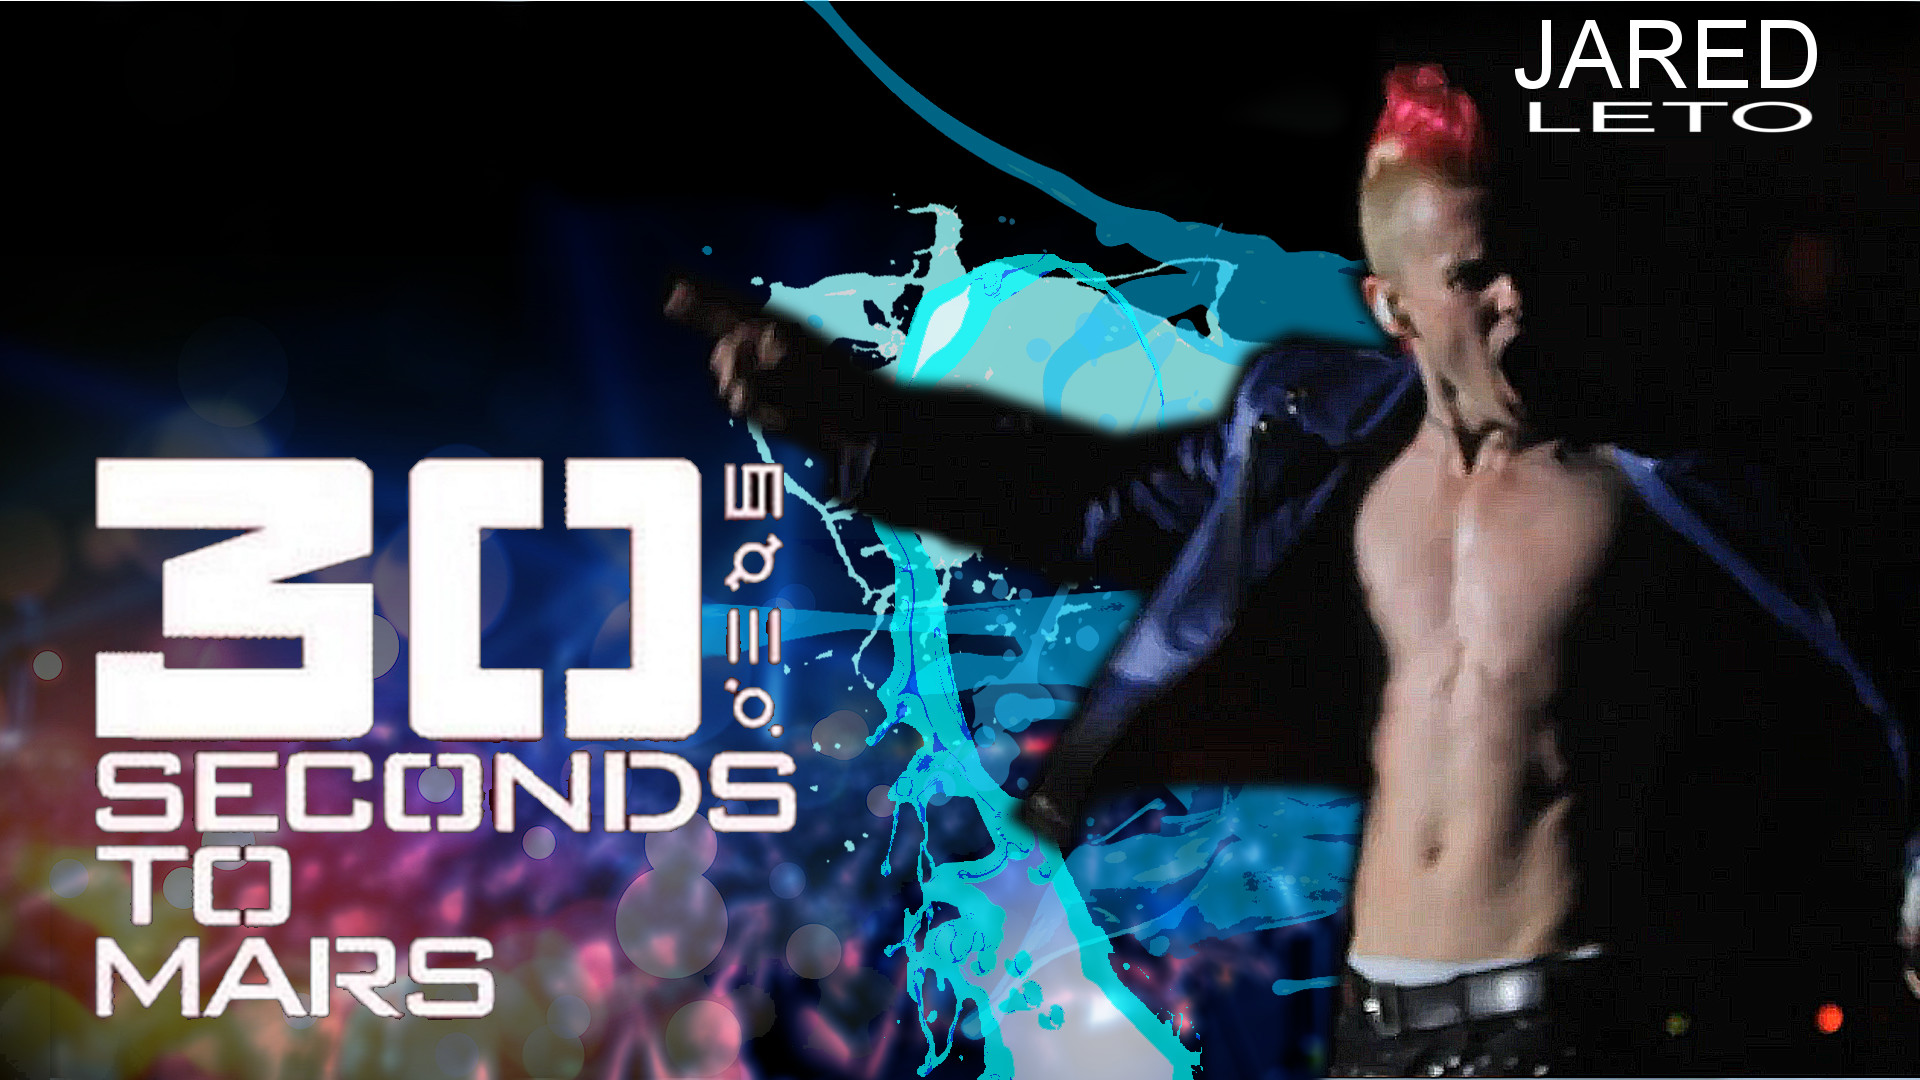 1920x1080 ... 30 seconds to mars - Wallpaper - Jared by guichearmo